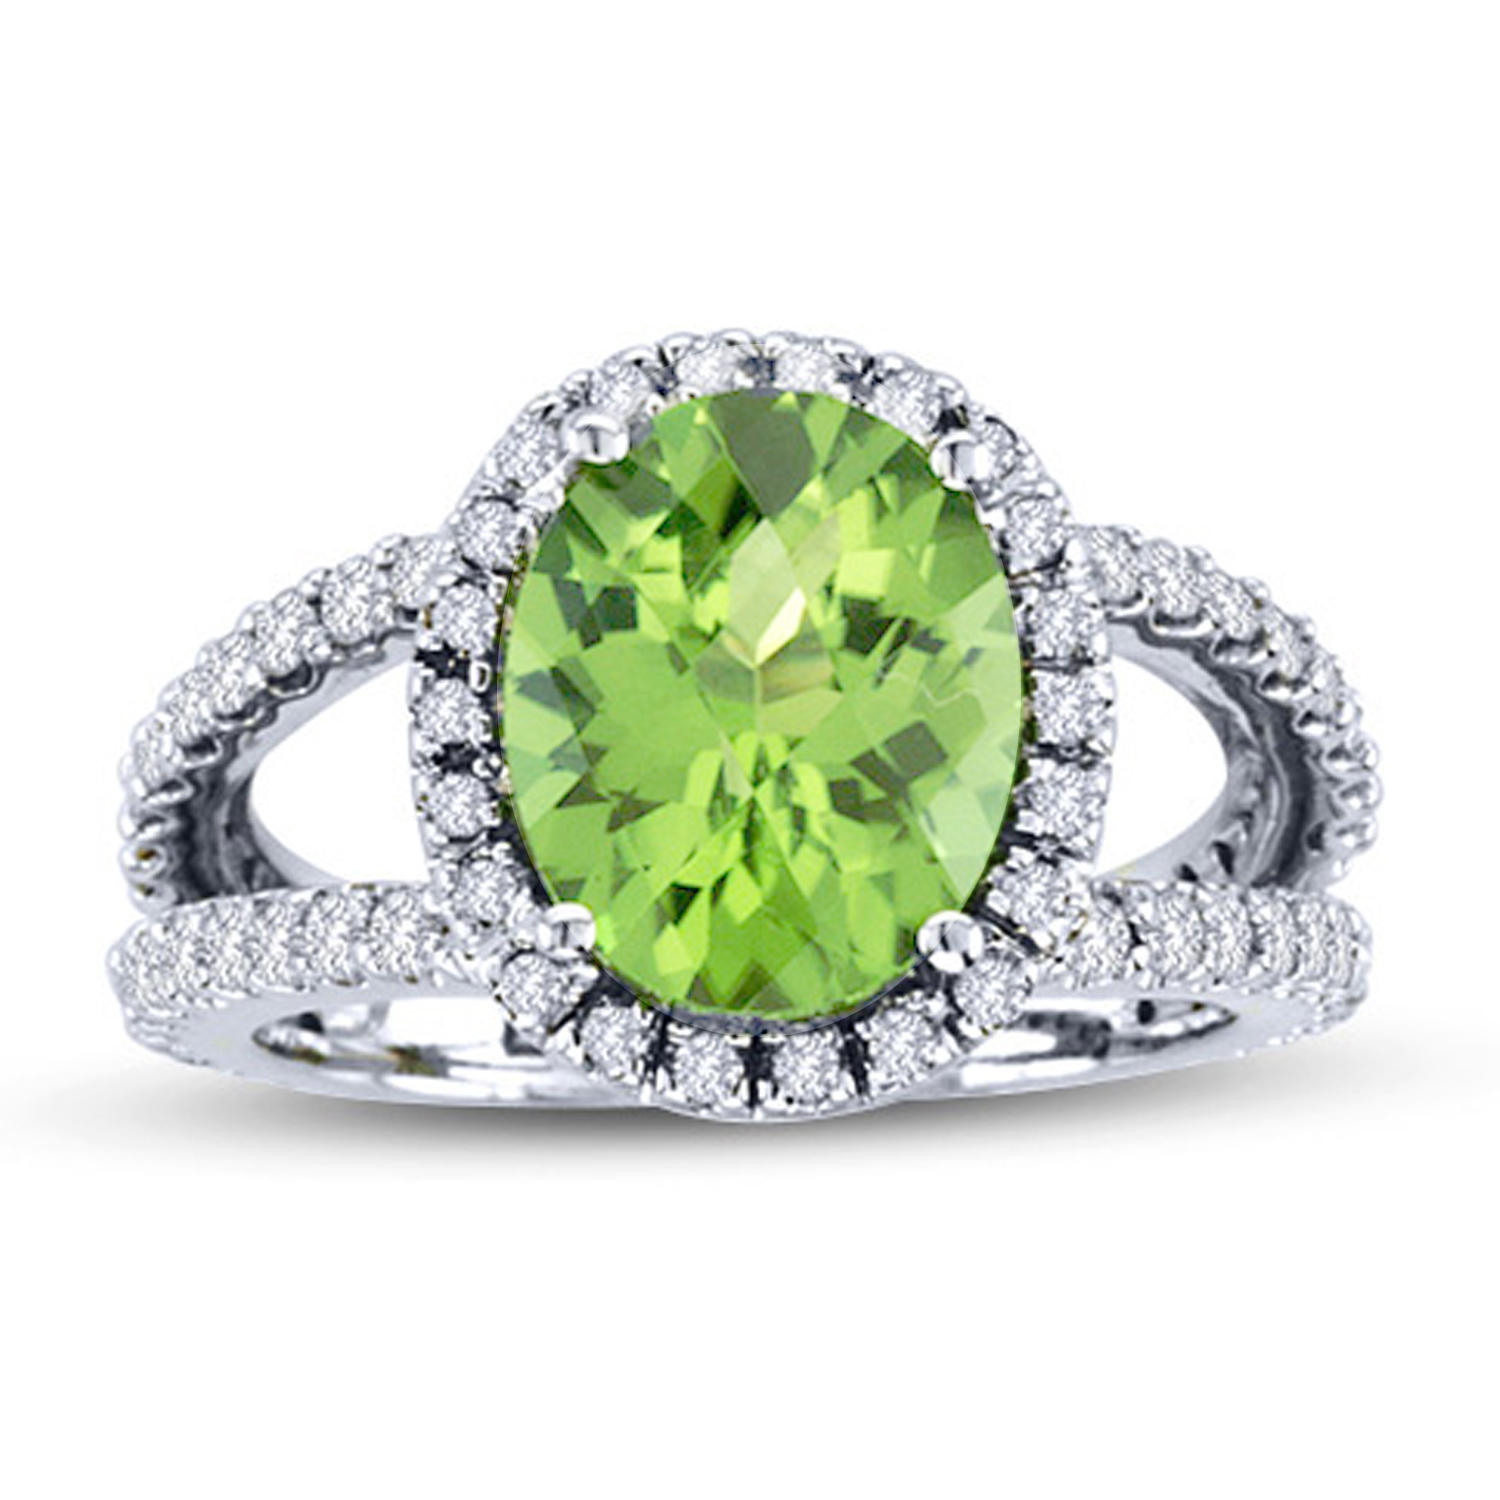 View 14k Gold Split Shank Ring with 0.85ct tw of Round Diamonds and 11x9mm Peridot Oval Shape Center Stone